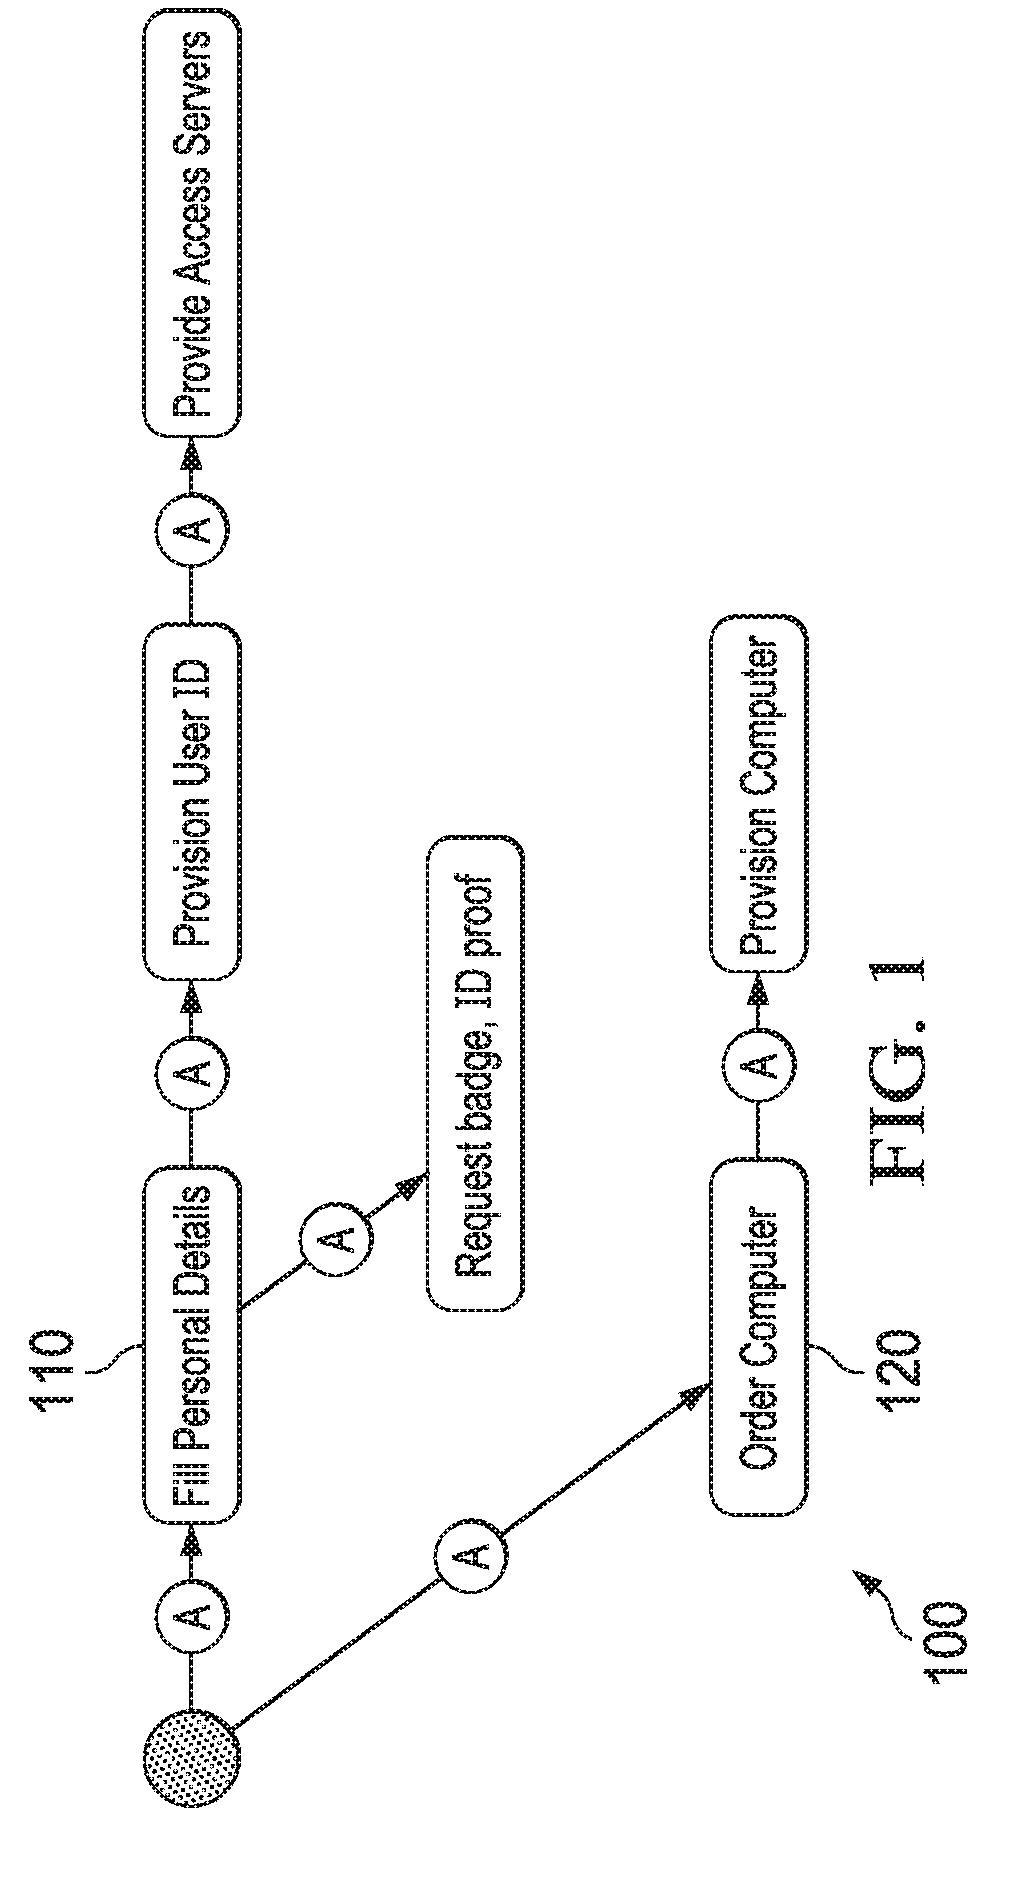 Systems and methods of activity flows in lifecycle models